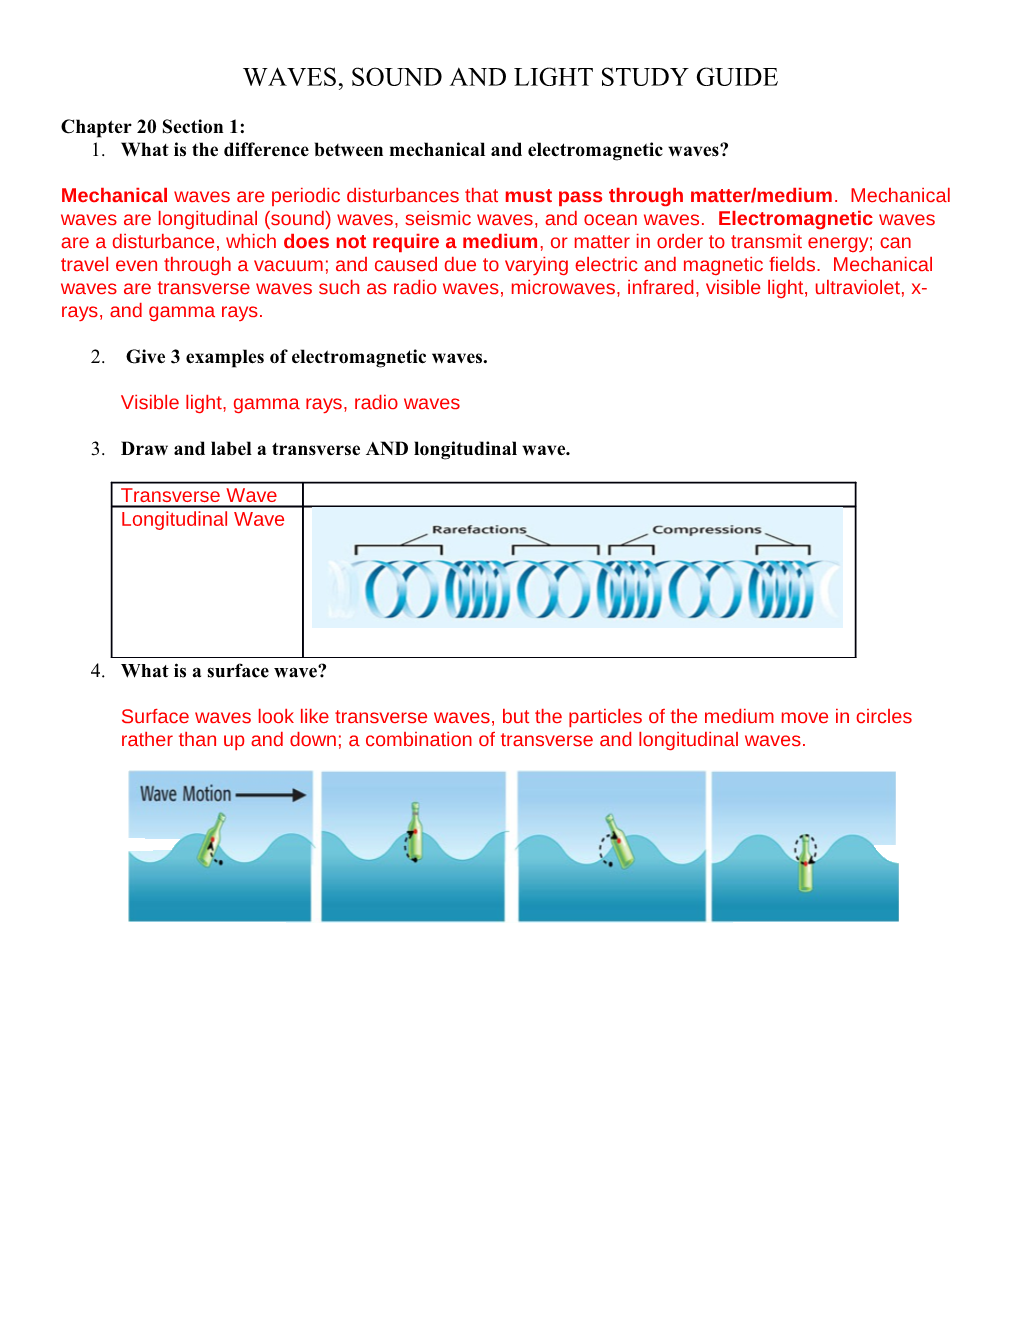 Electromagnetism, Waves, Sound and Light Study Guide